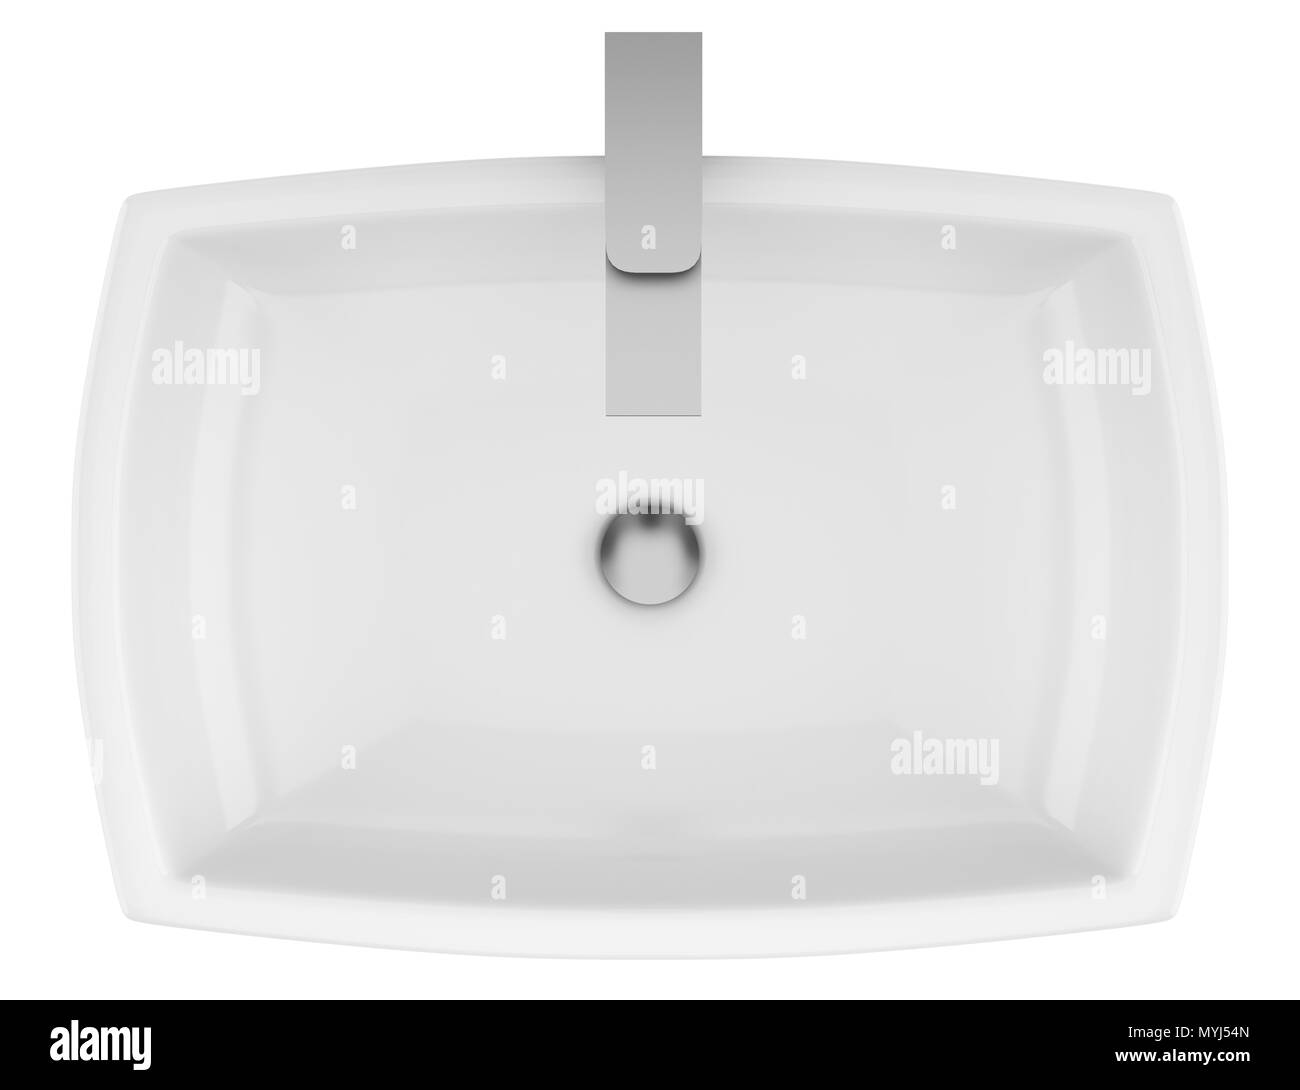 Top View Of Ceramic Bathroom Sink Isolated On White